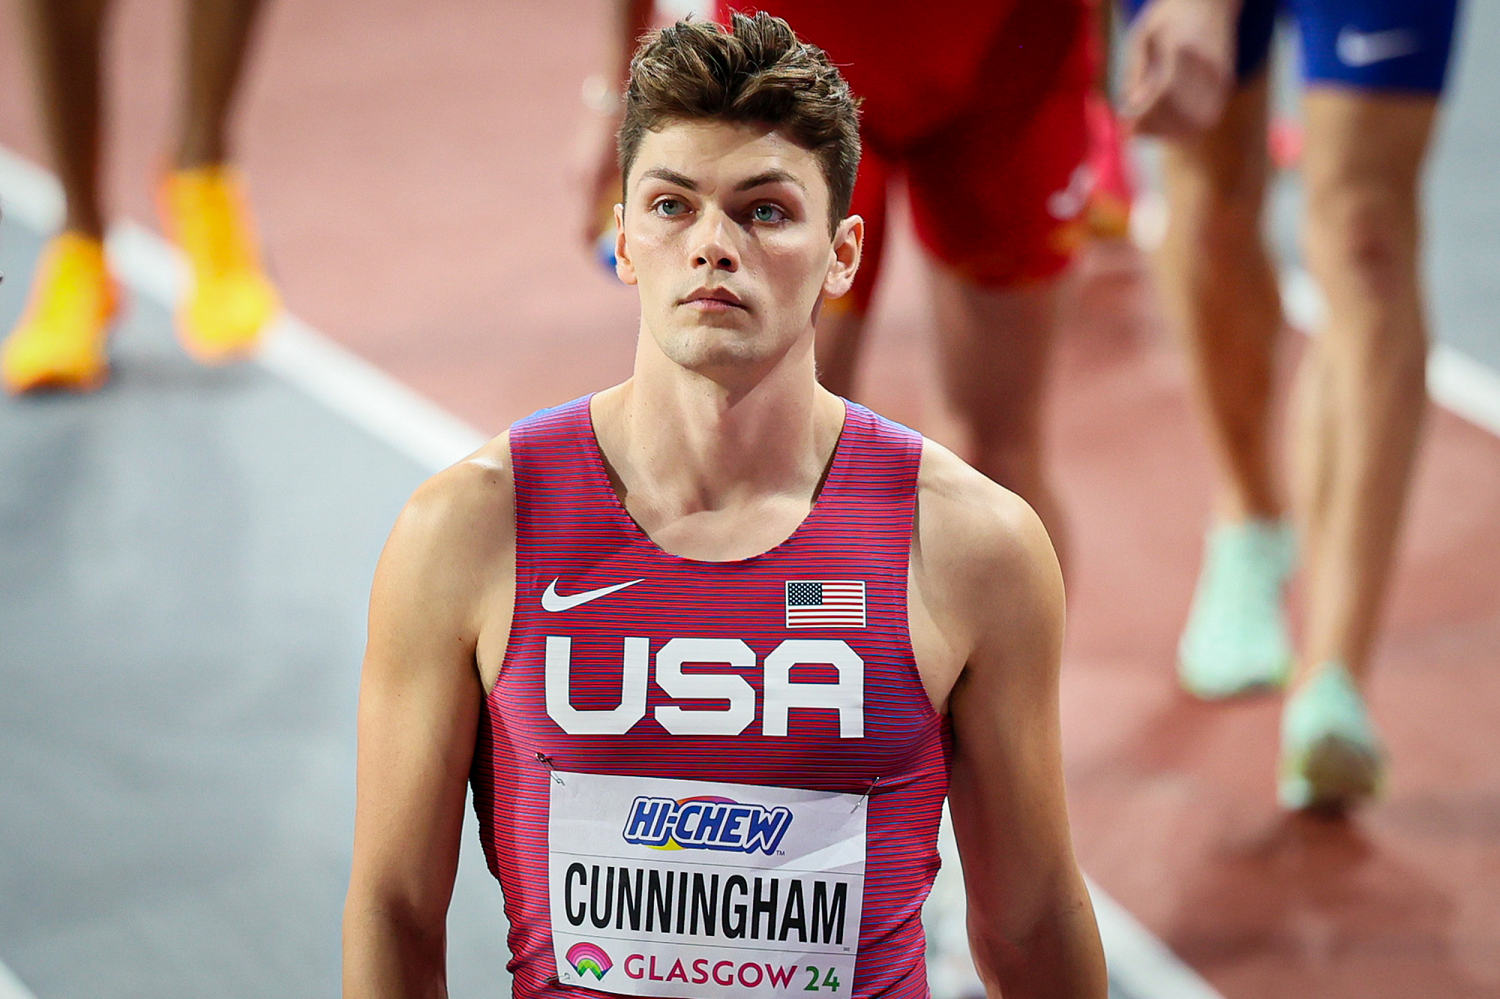 U.S. track star Trey Cunningham comes out as gay